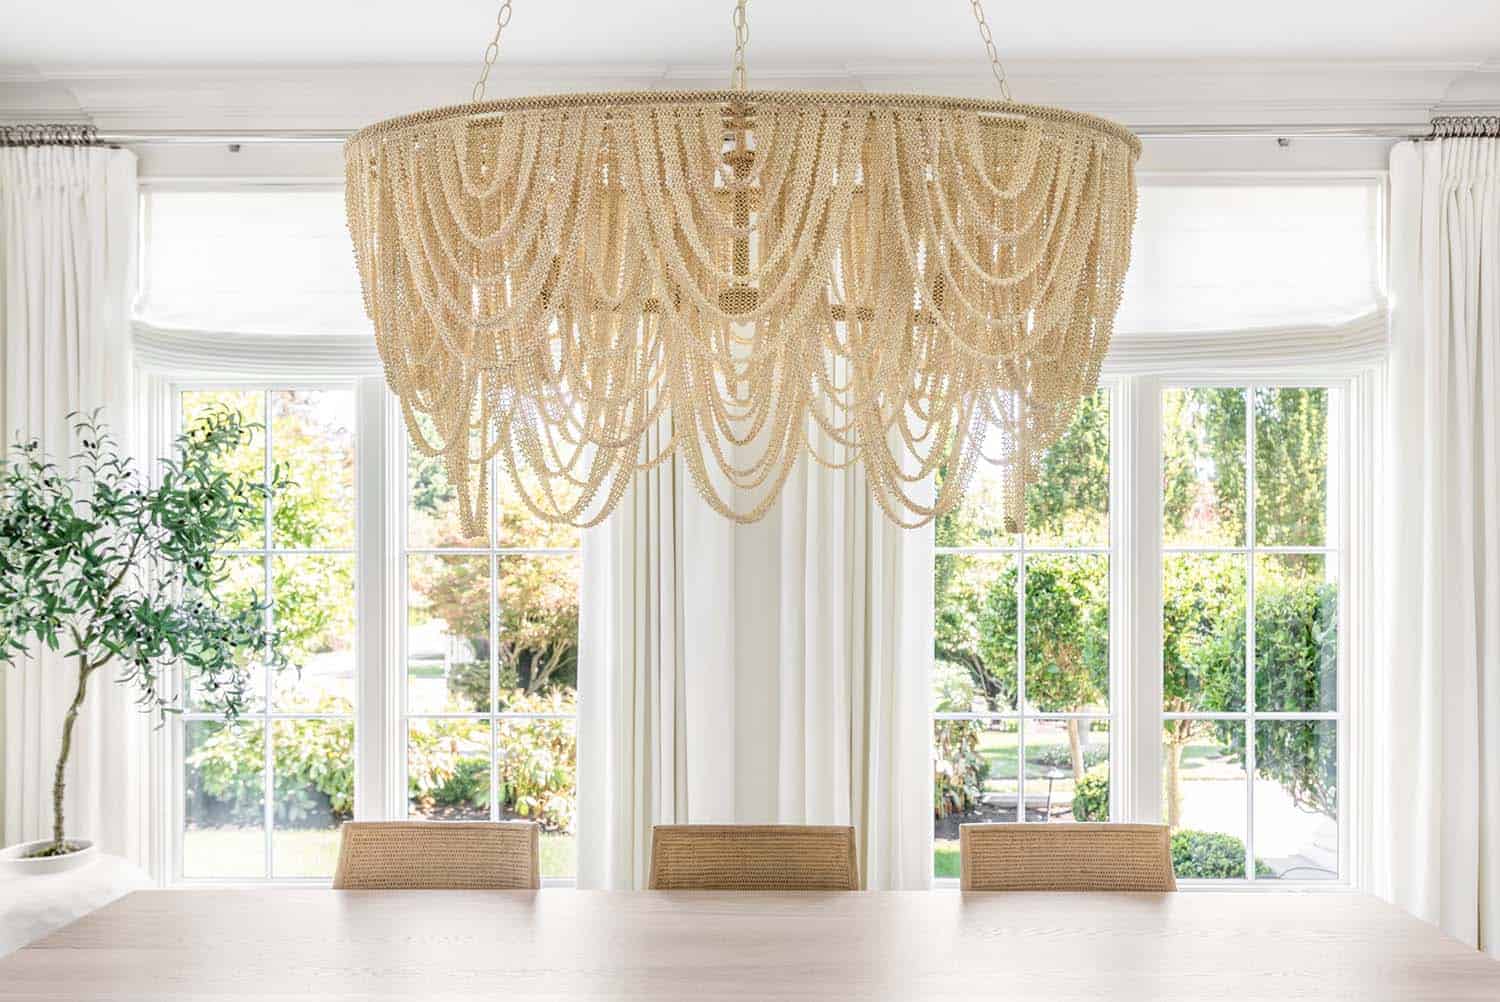 transitional dining room chandelier detail